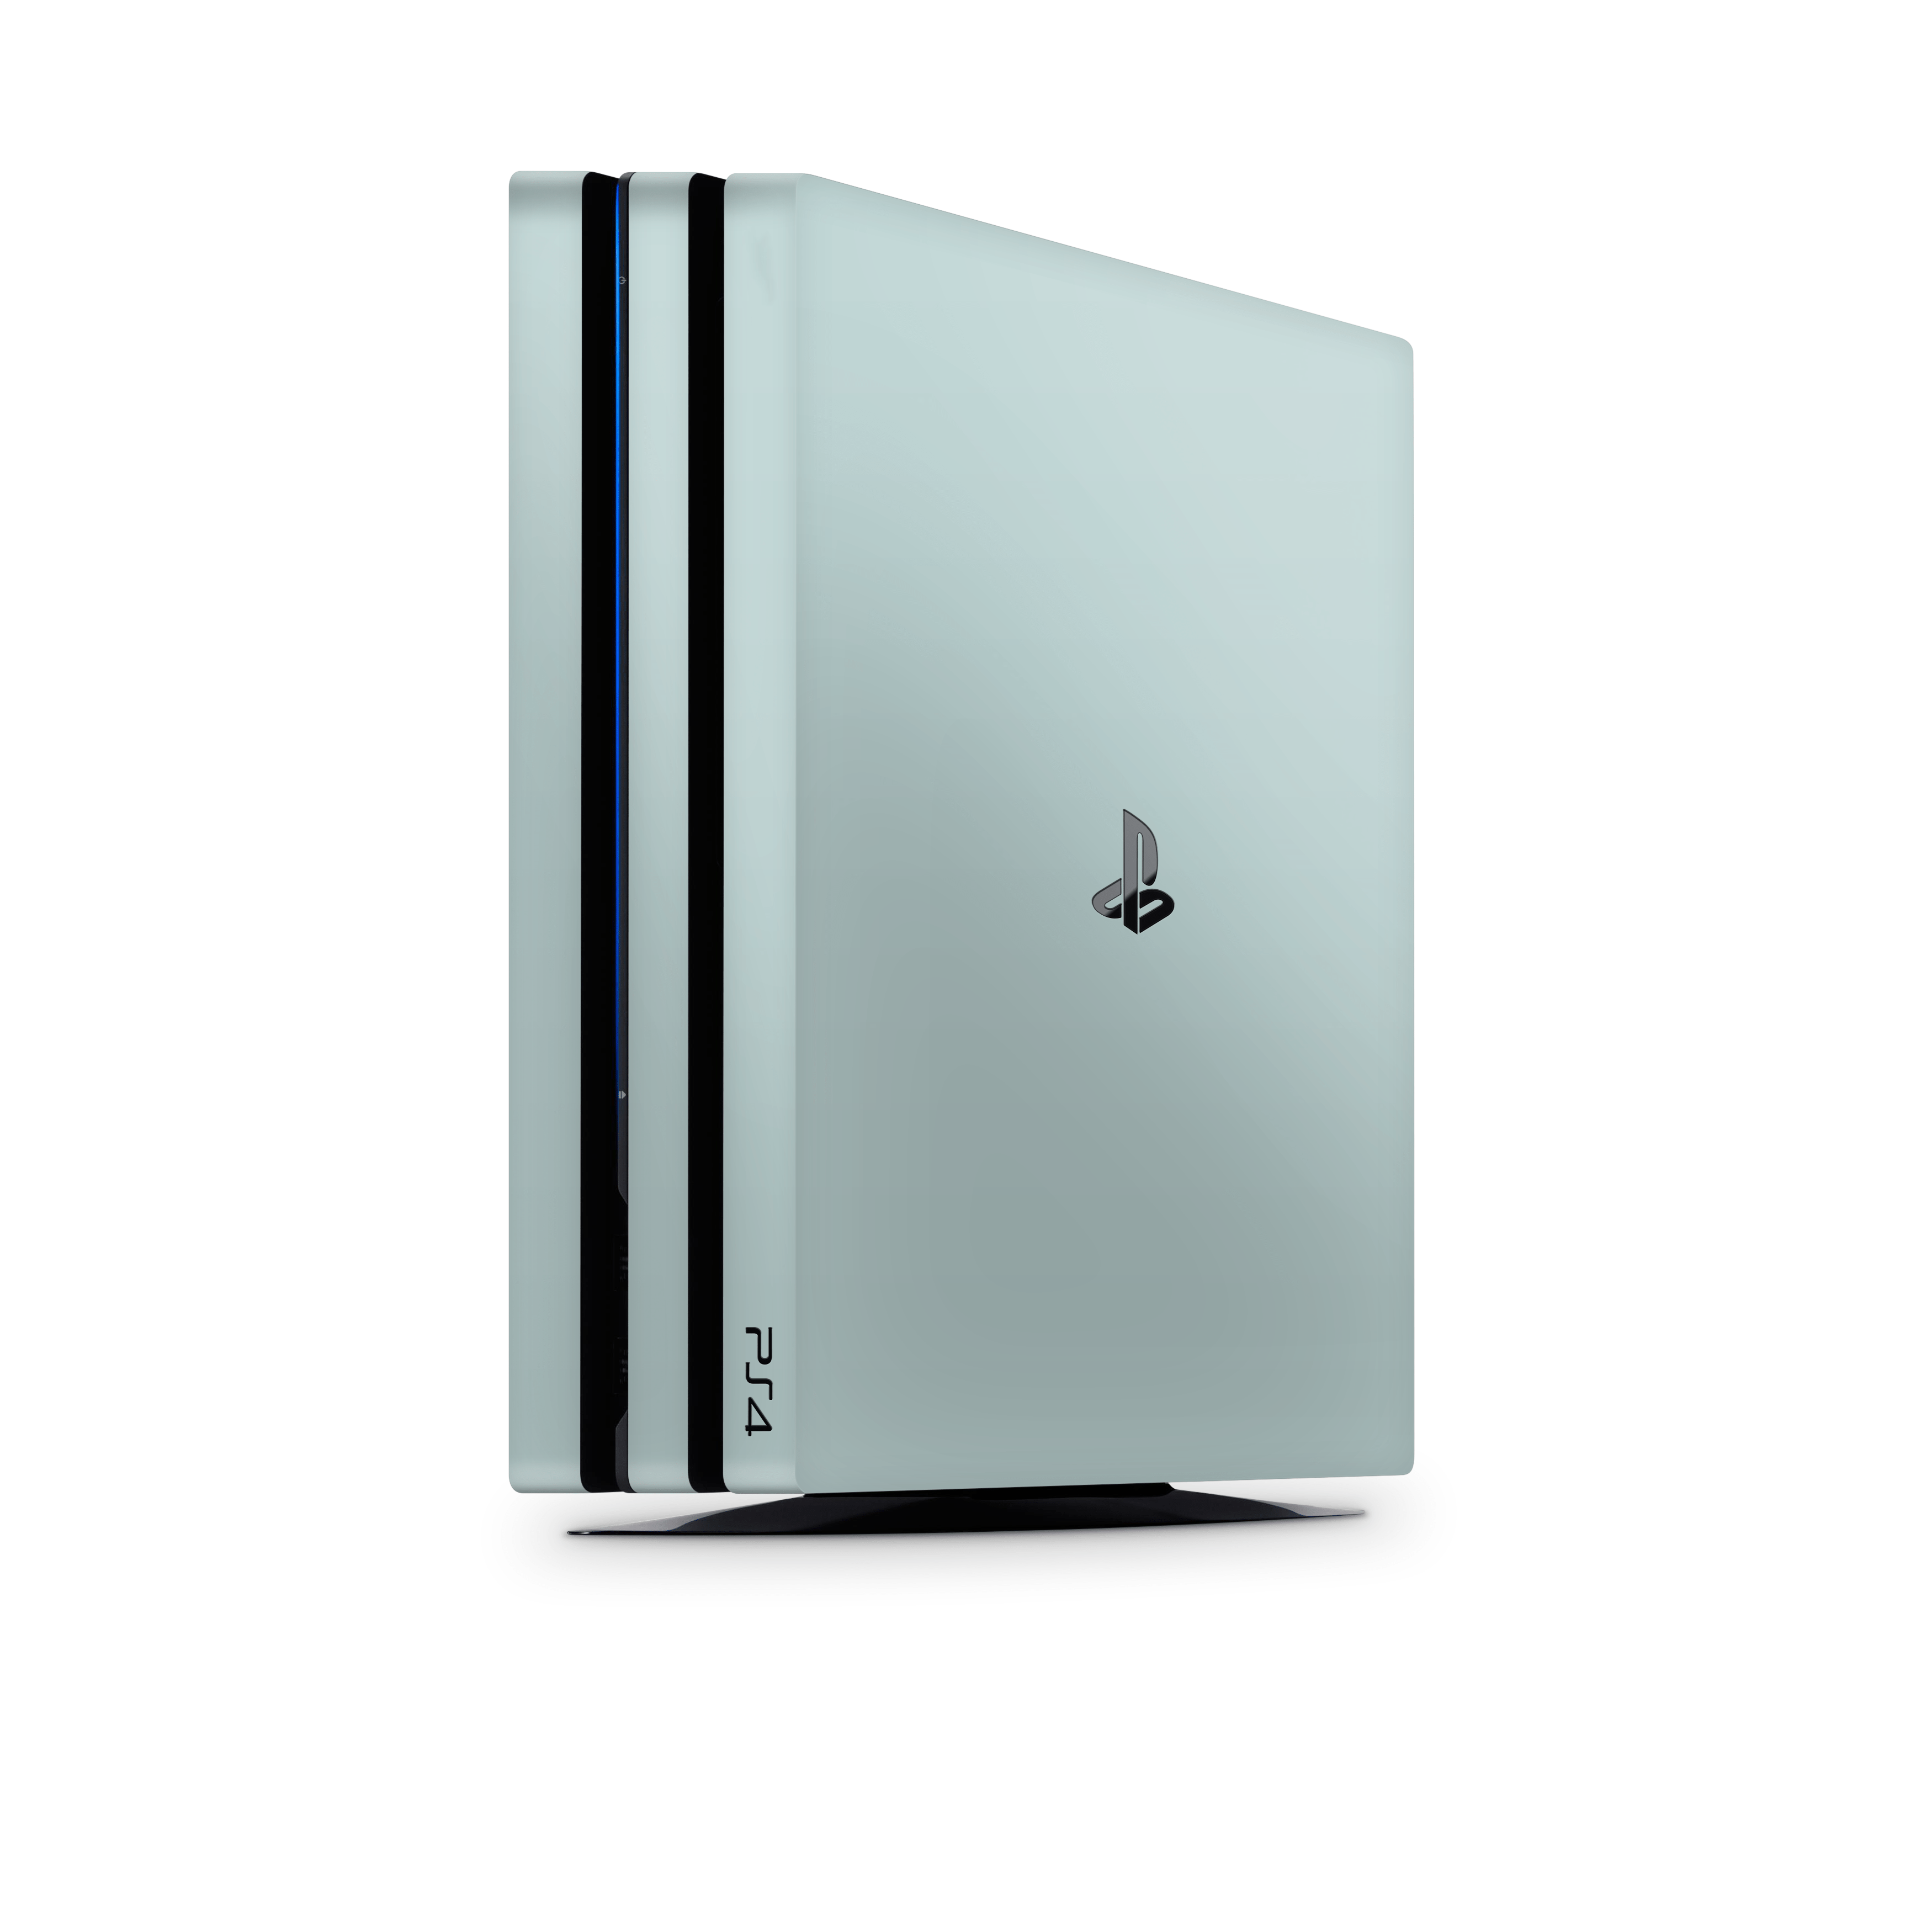 Dusty Blue PS4 | PS4 Pro | PS4 Slim Skins